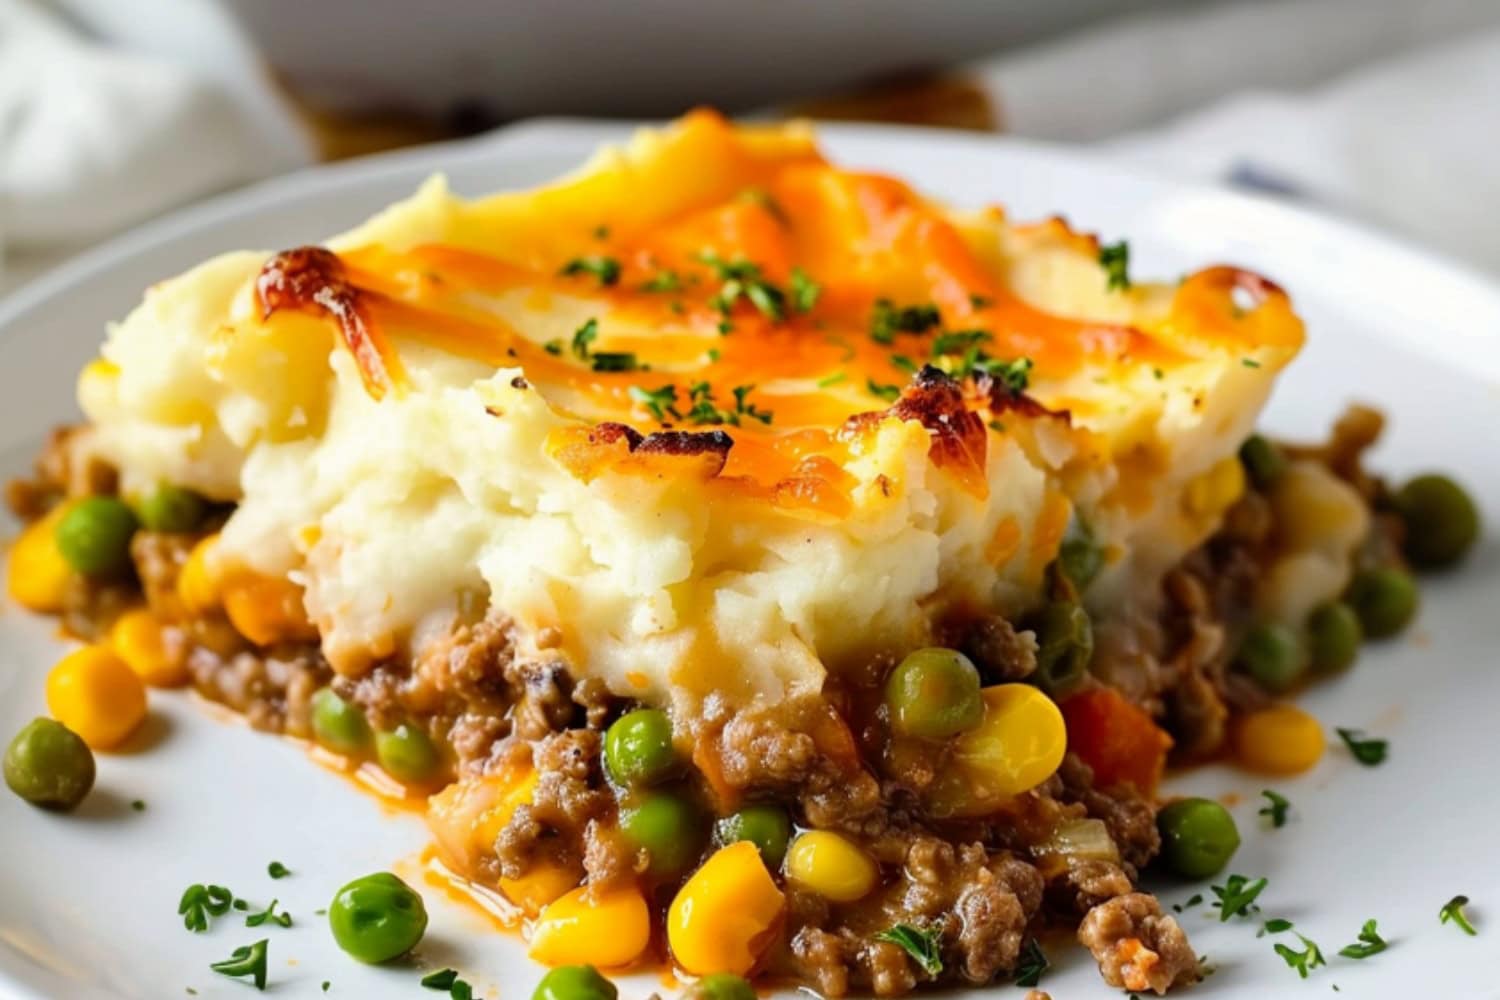 Pie with mashed potatoes on top of ground lamb.